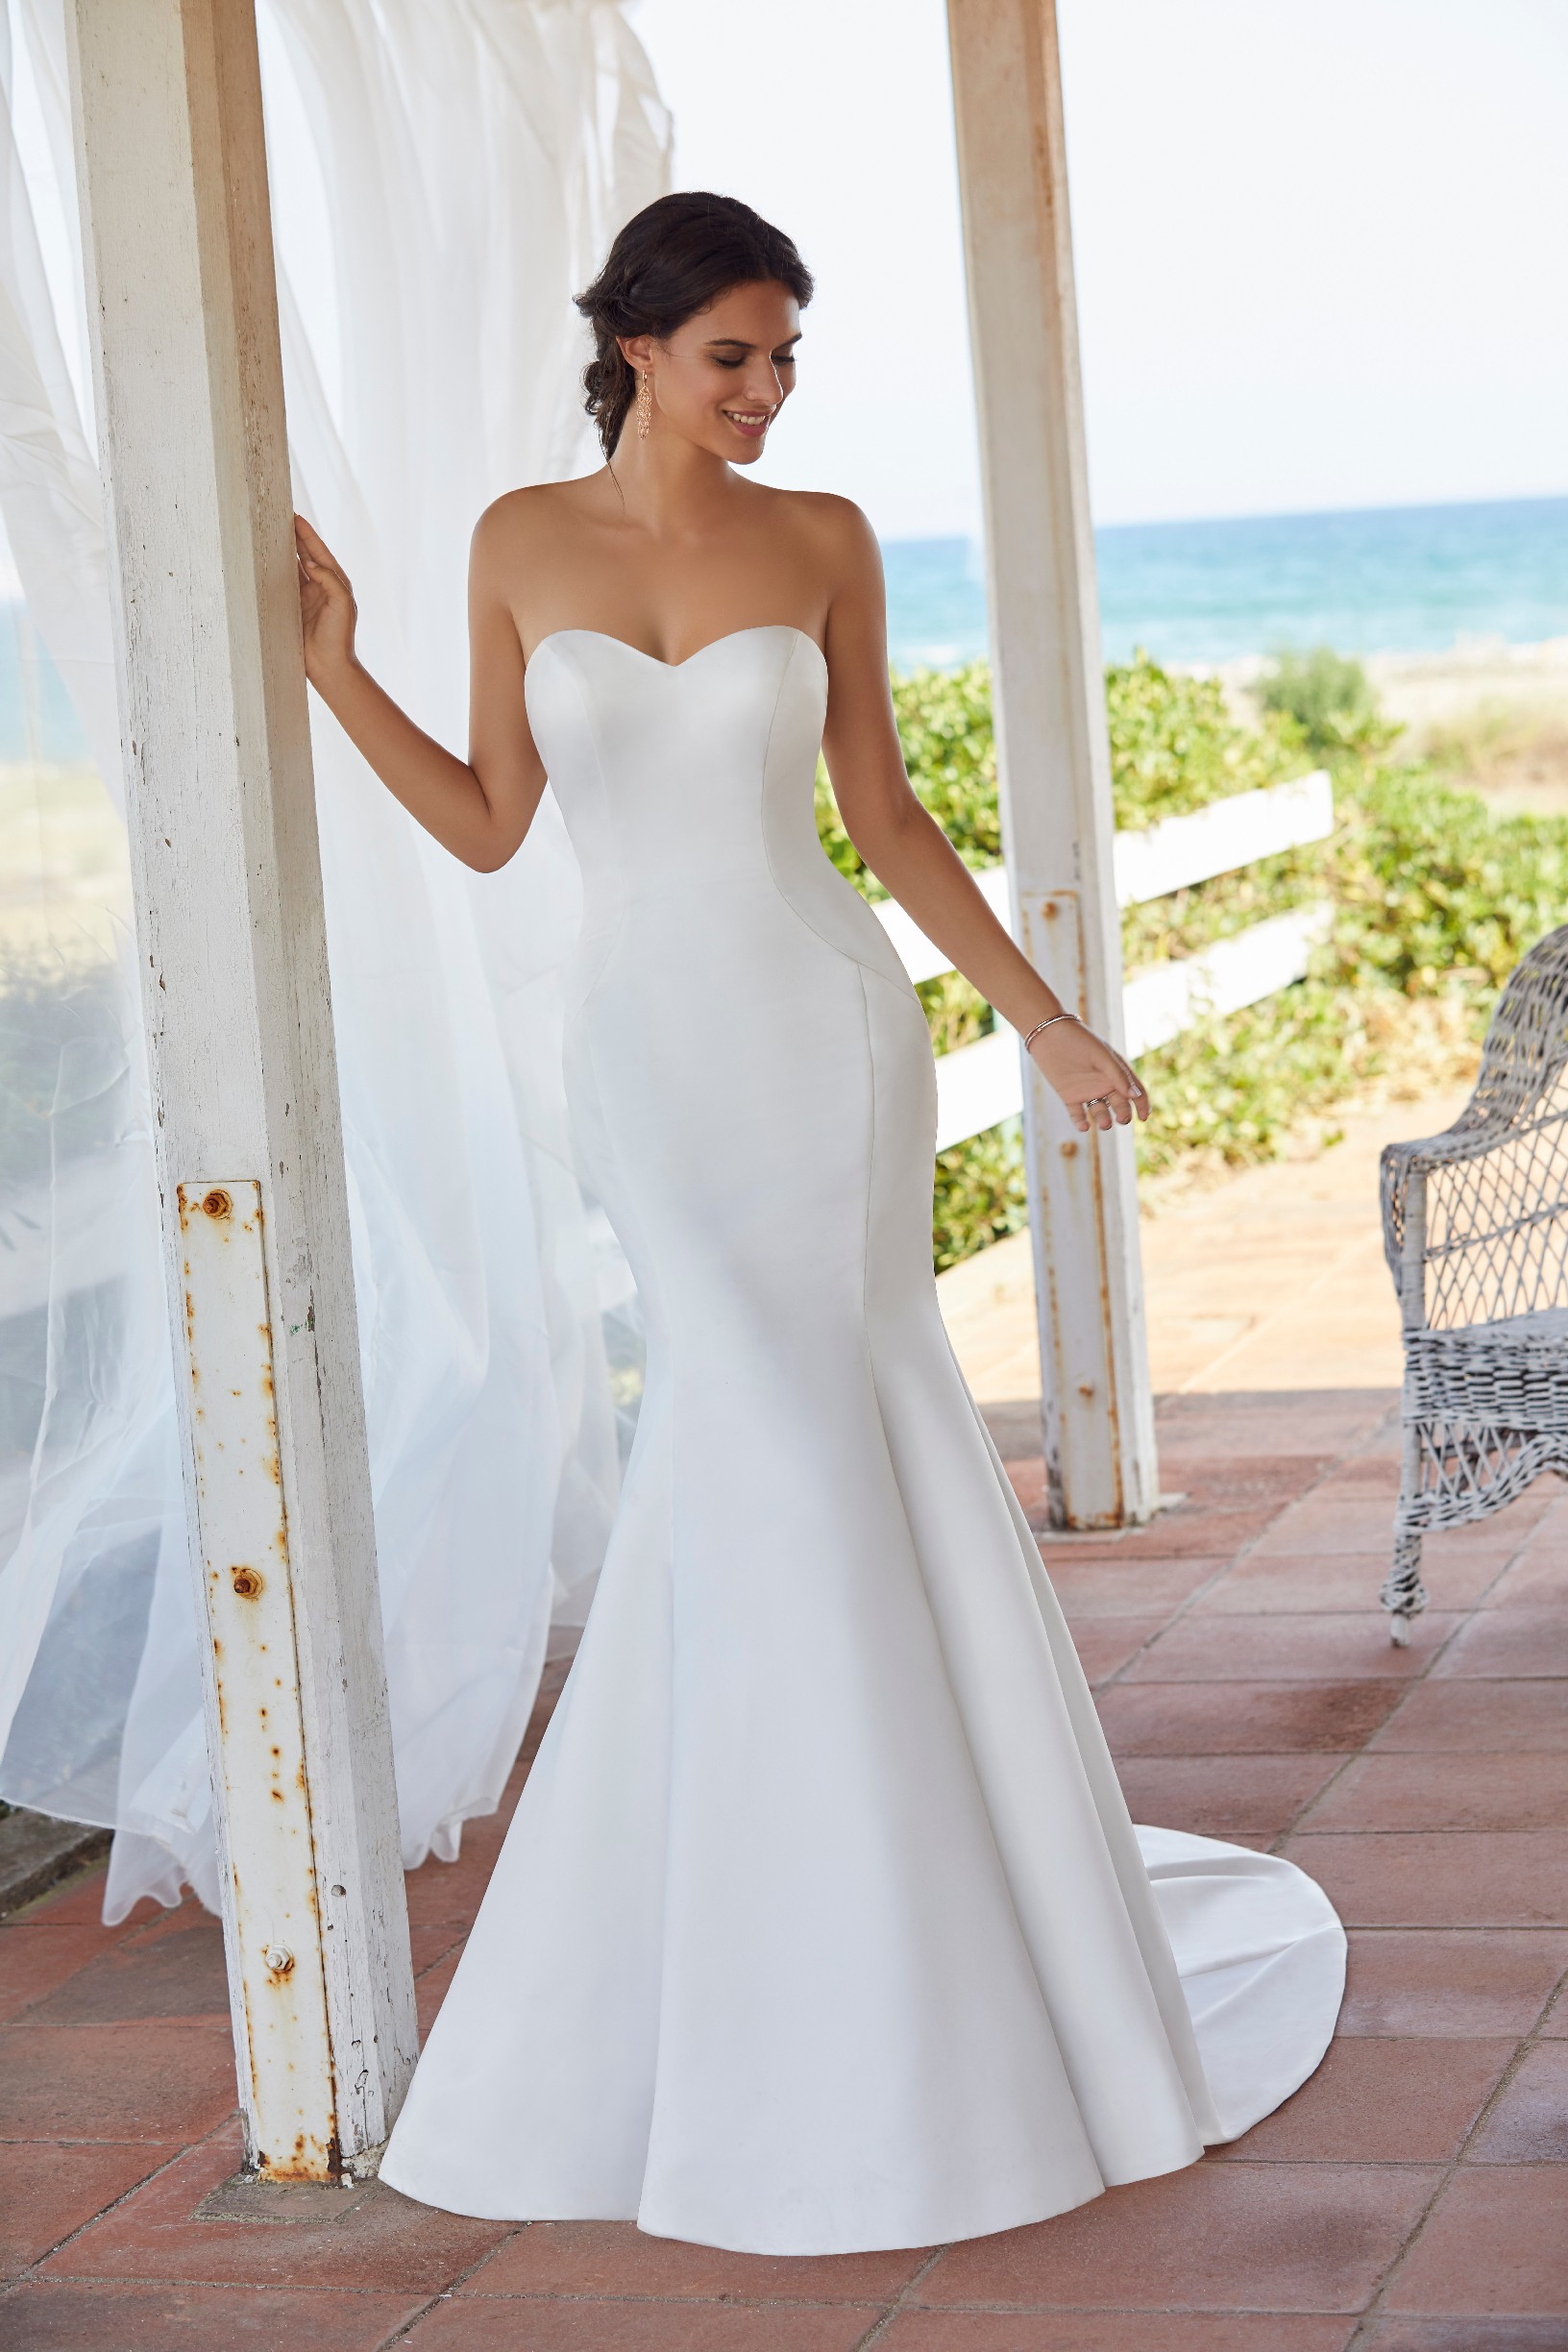 Brunette woman stands on porch beside the sea wearing simple and classic strapless wedding dress with fishtail skirt